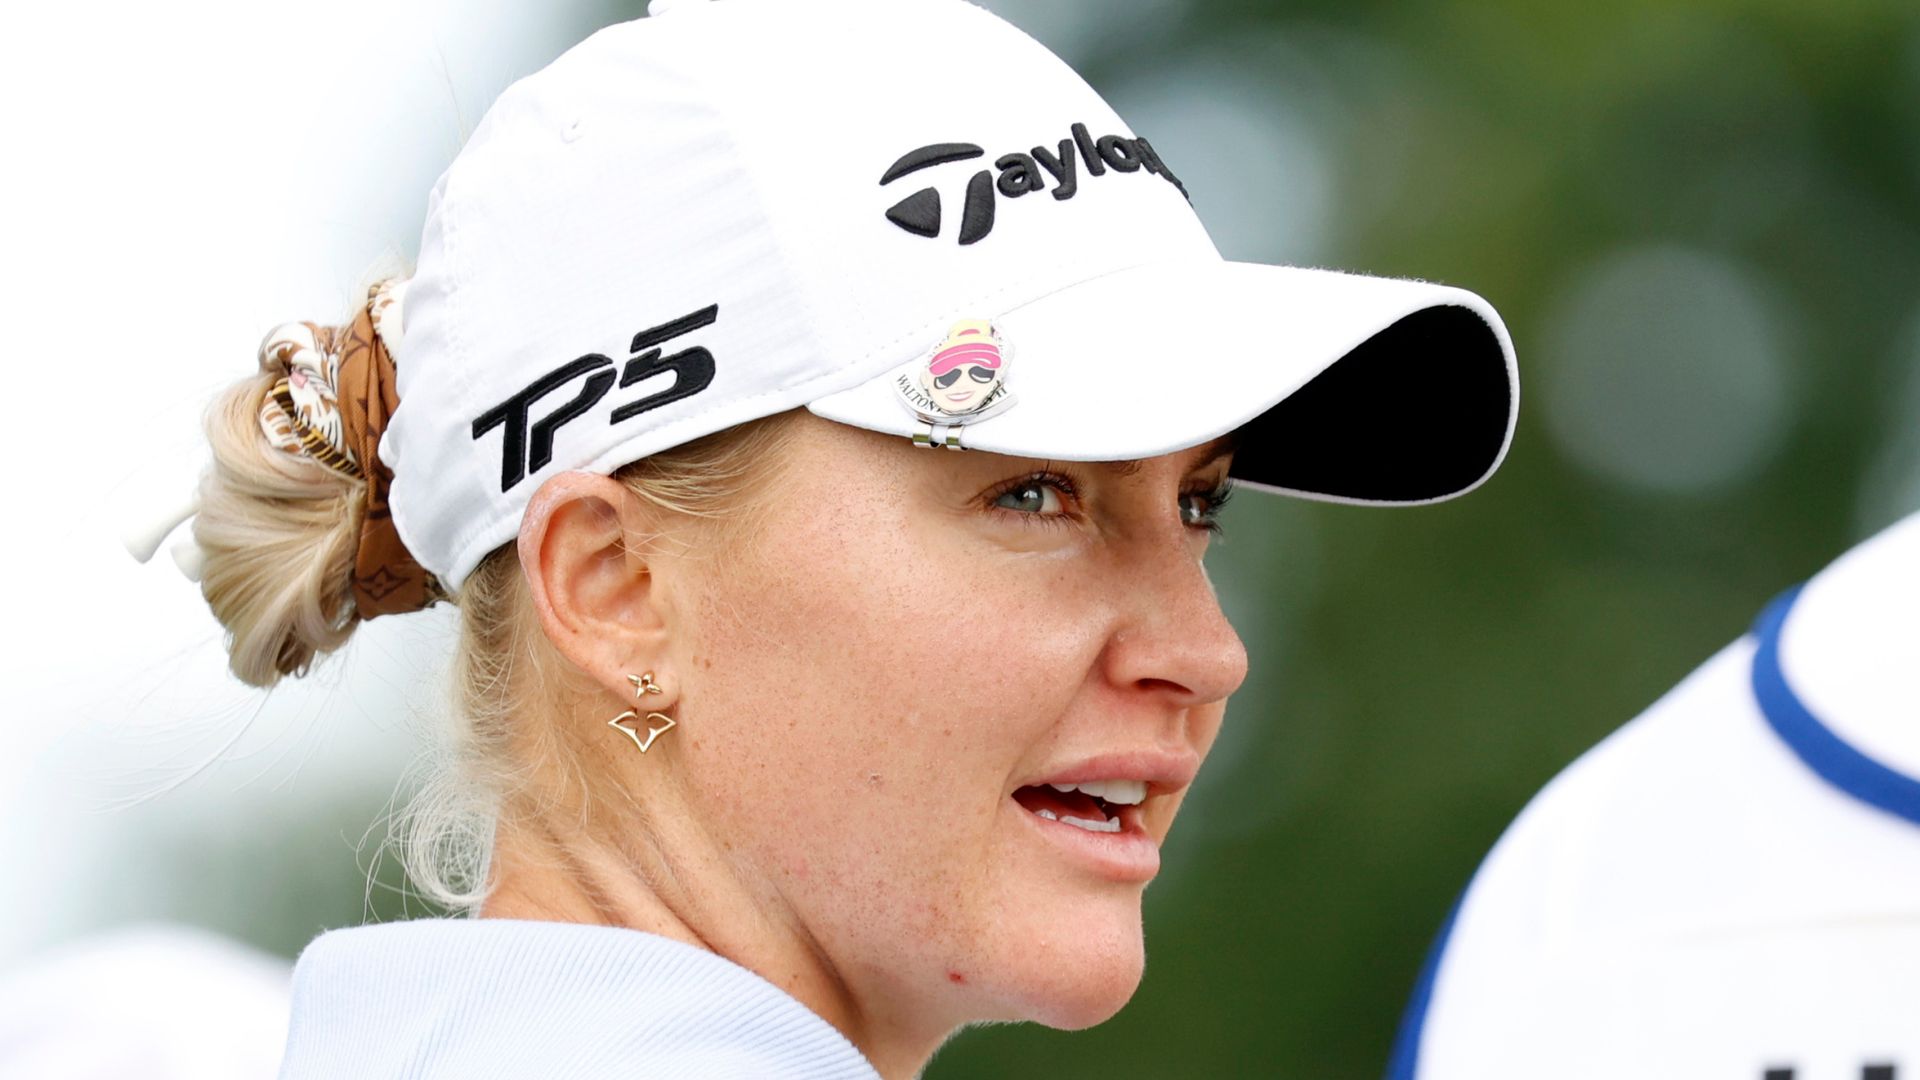 Should Hull win more on LPGA Tour? 'Never changing will cost her'